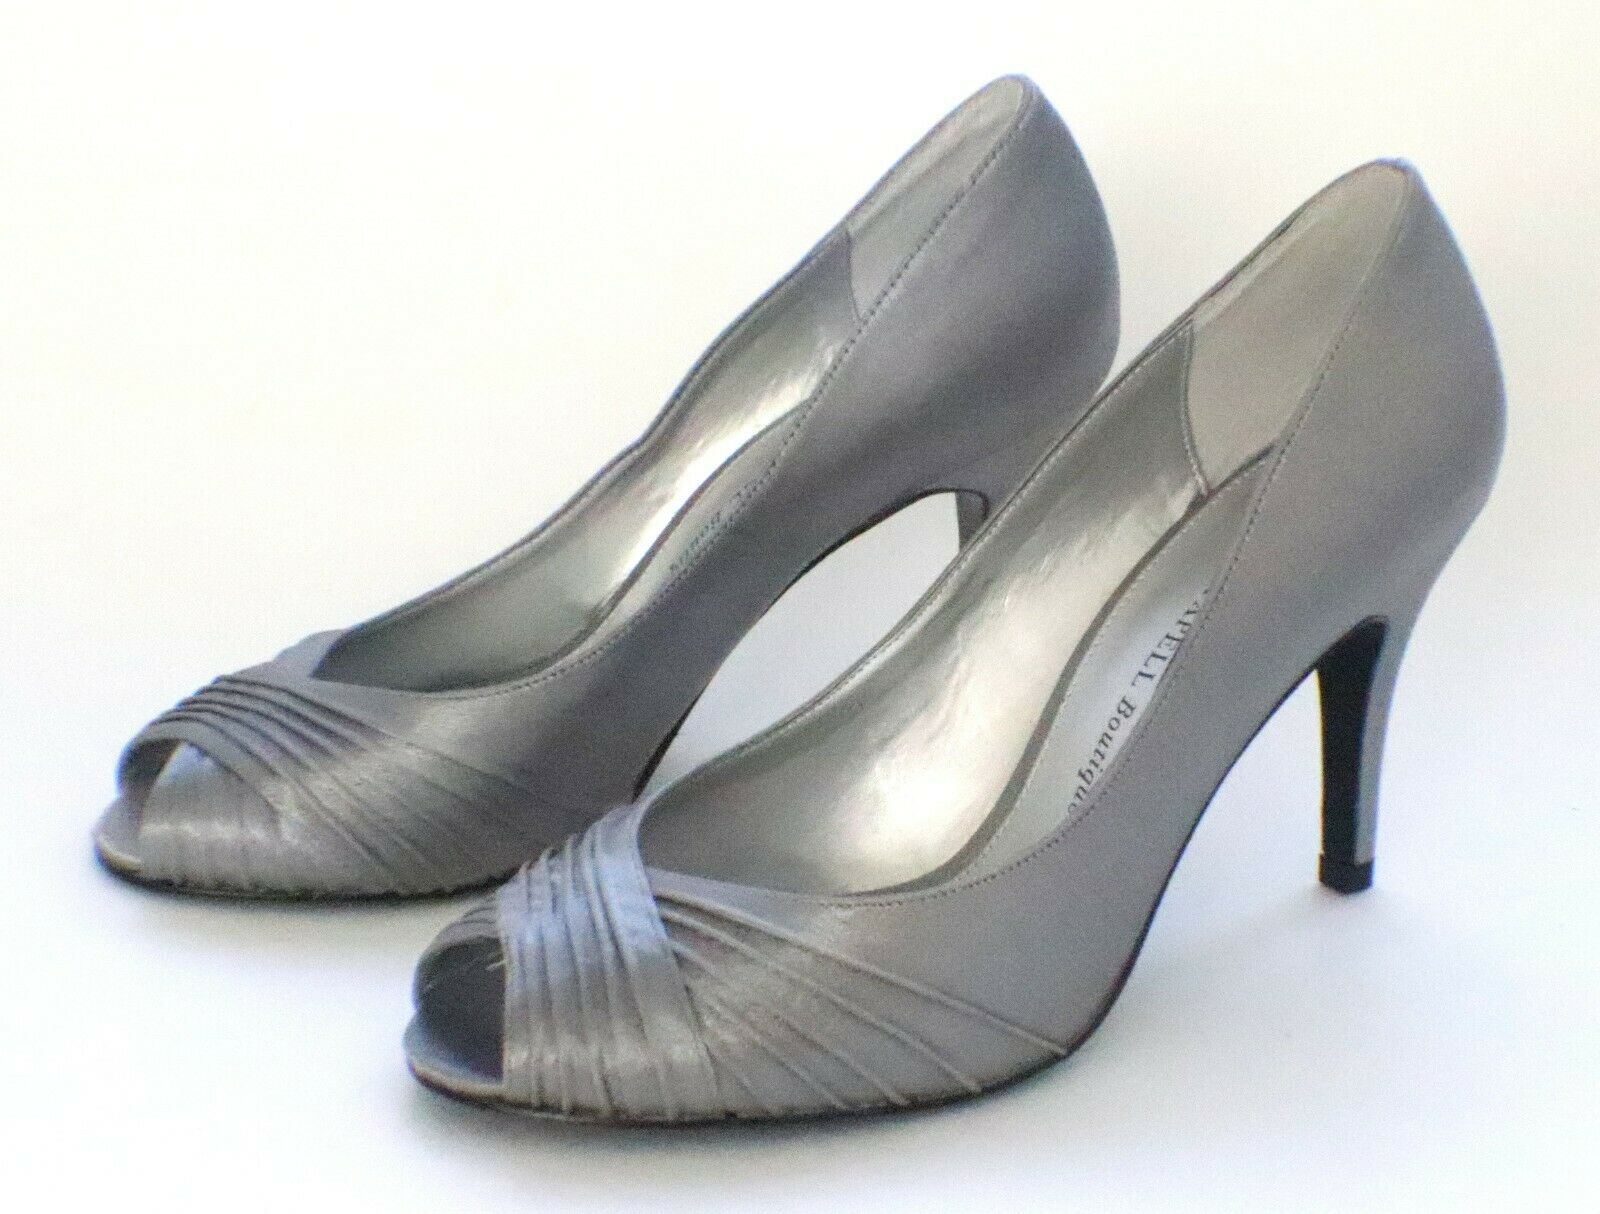 New Adrianna Papell Boutique Shoes Size 8 Matte Silver Satin Heel/Pump Peep Toe 